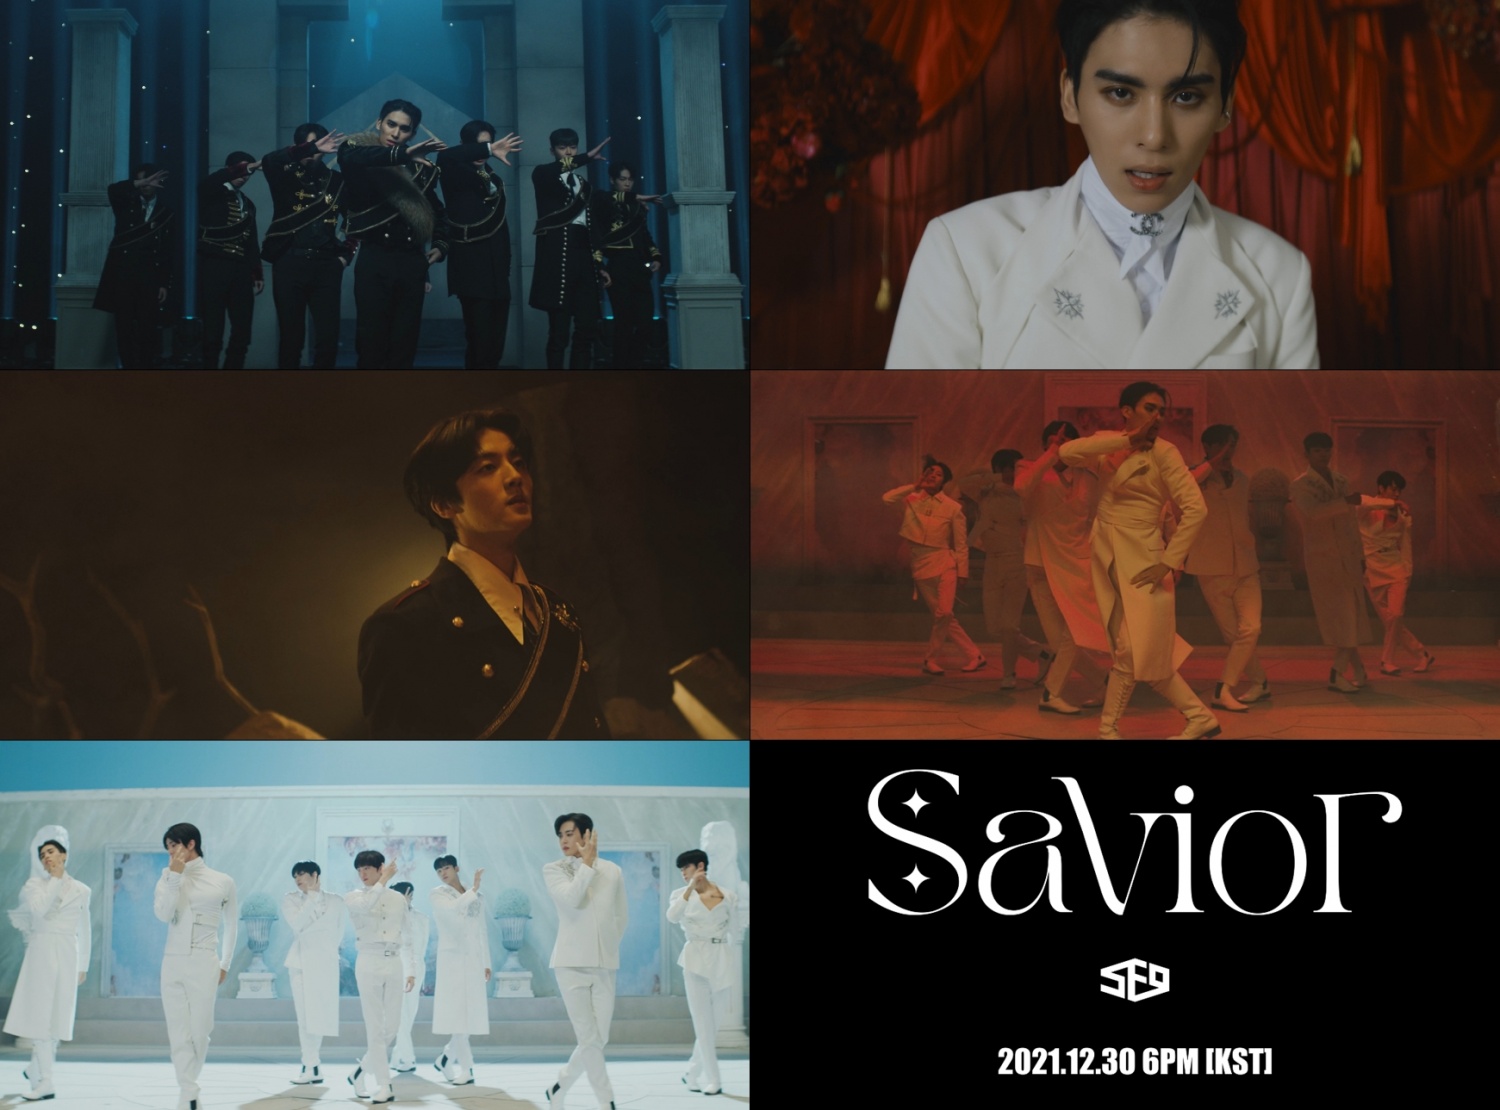 Image for UNIVERSE Reveals SF9's New Song 'Savior' MV Teaser